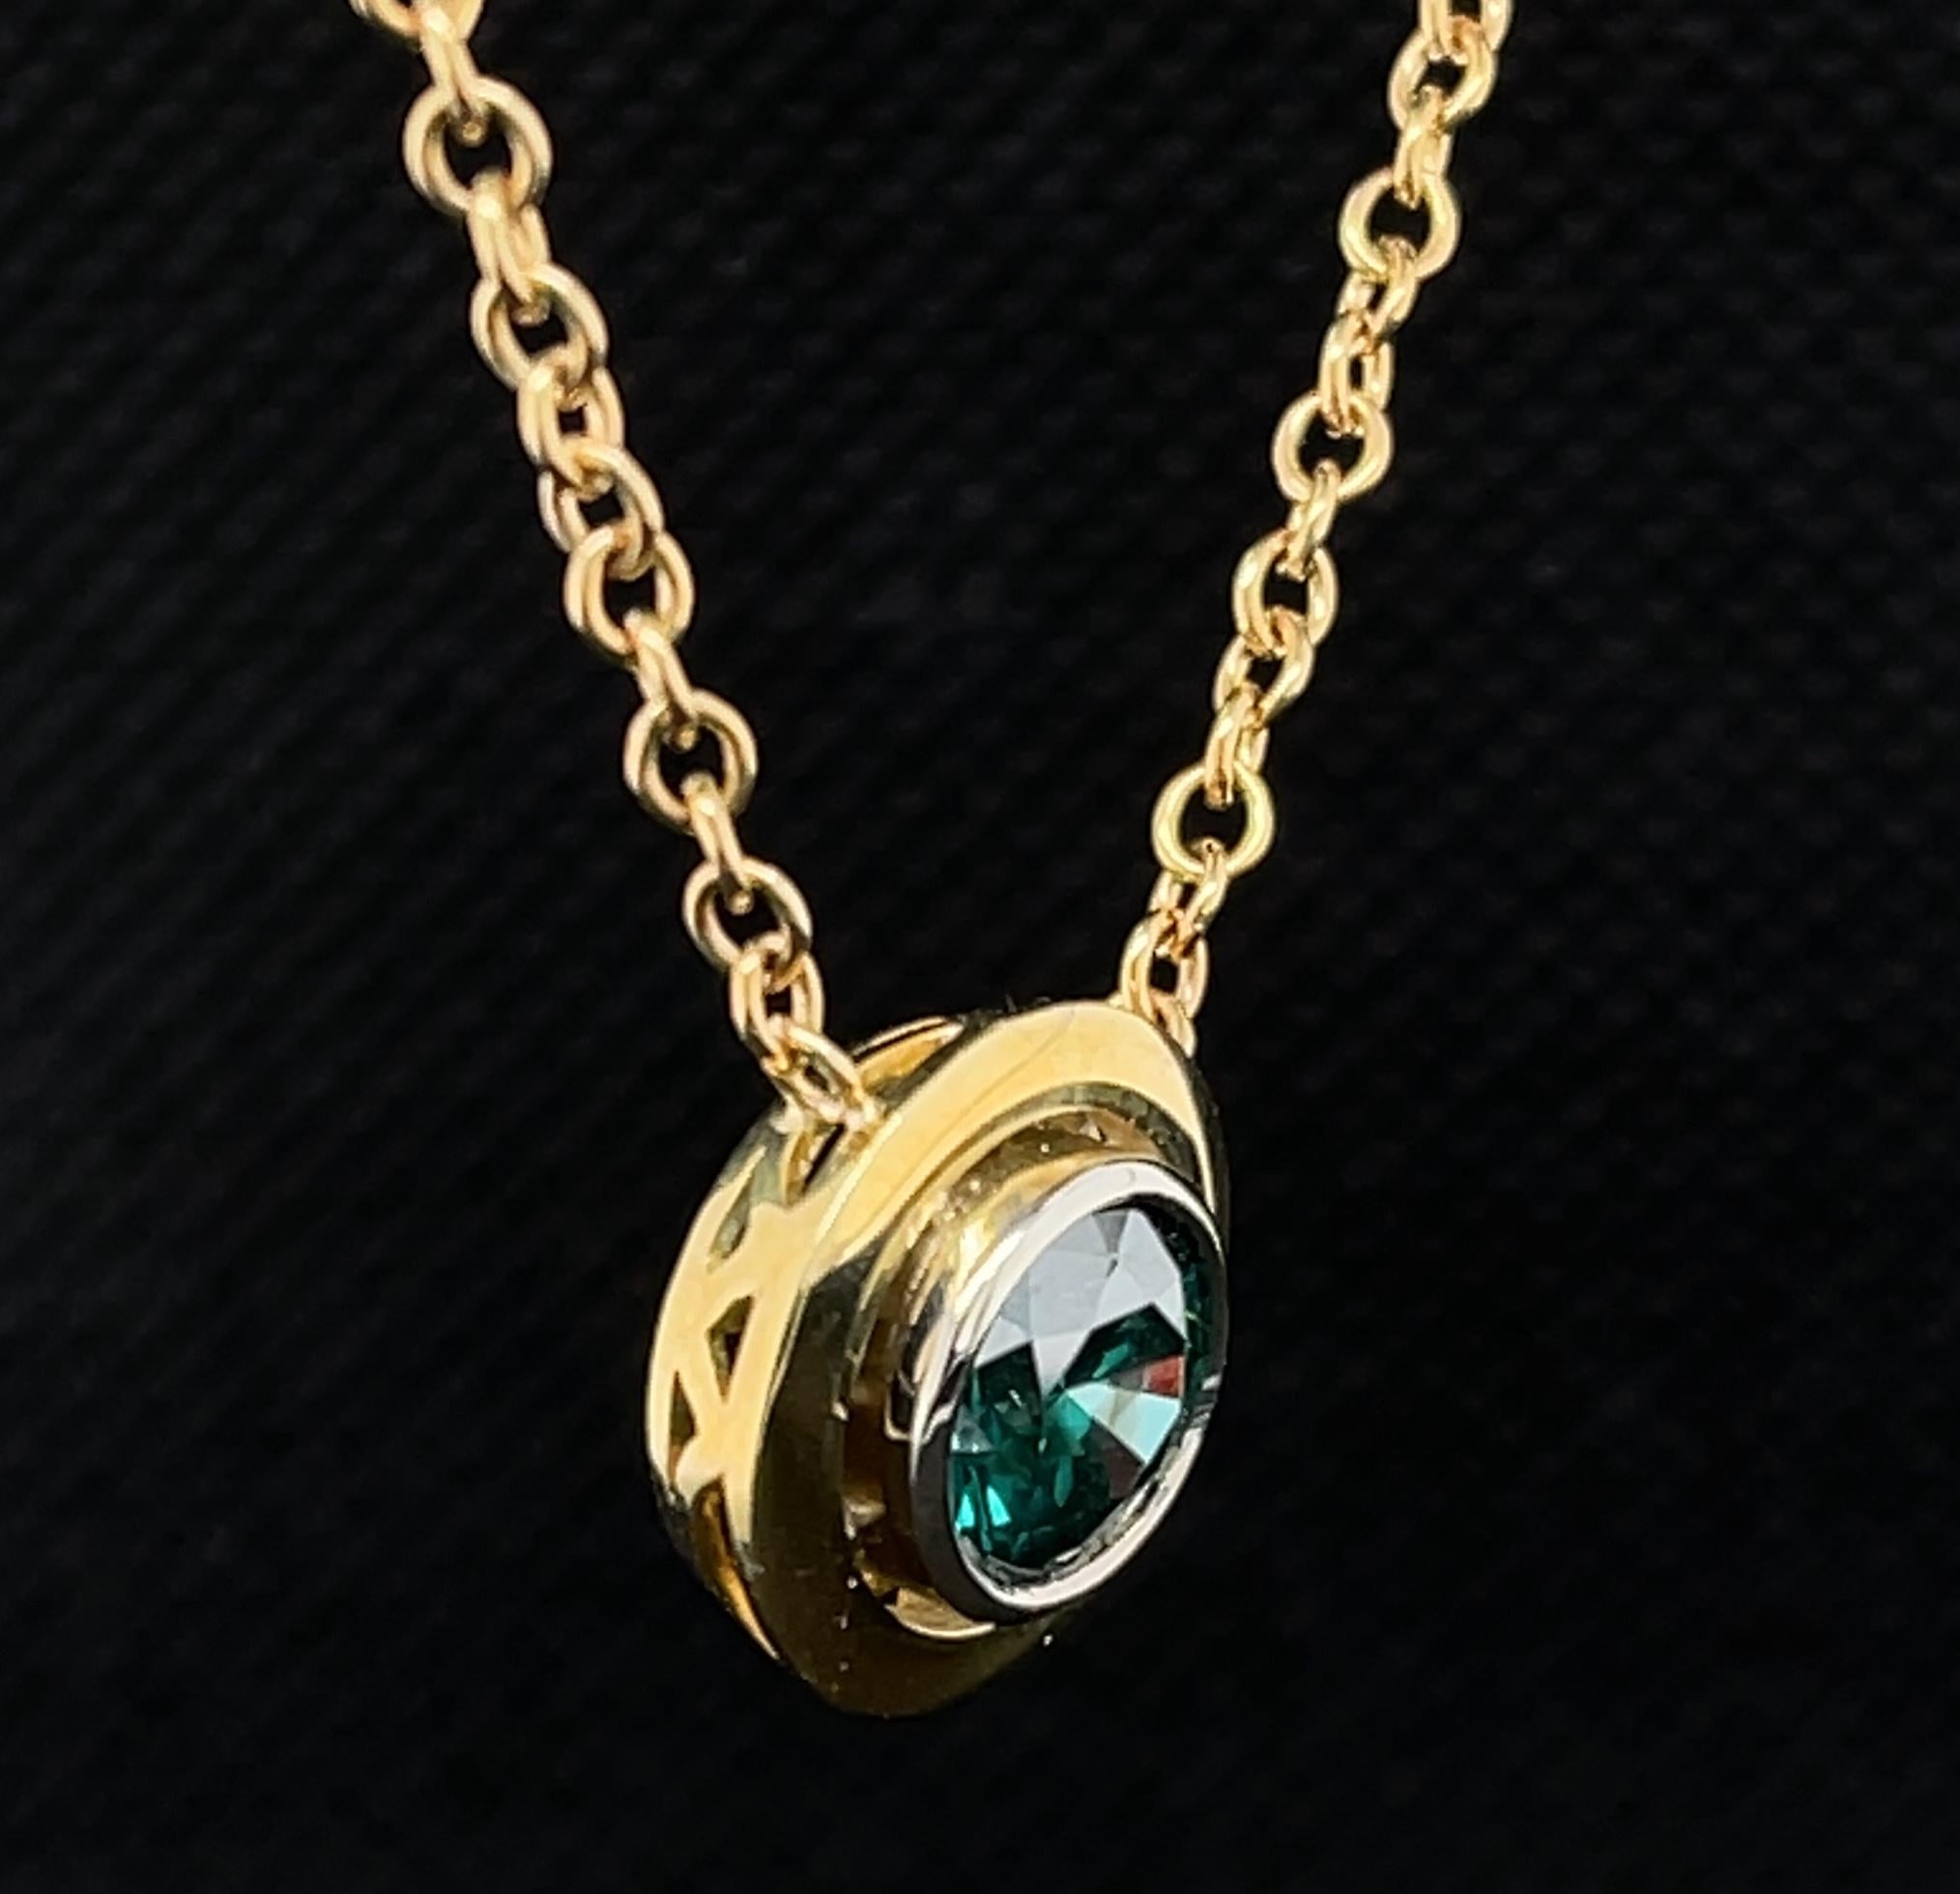 This eye-catching necklace features a stunning 1.66 carat round blue diamond set in an 18k white gold bezel with an 18k yellow gold bezel halo. This polished gold pendant is suspended from an 18k yellow gold chain, allowing the center diamond to